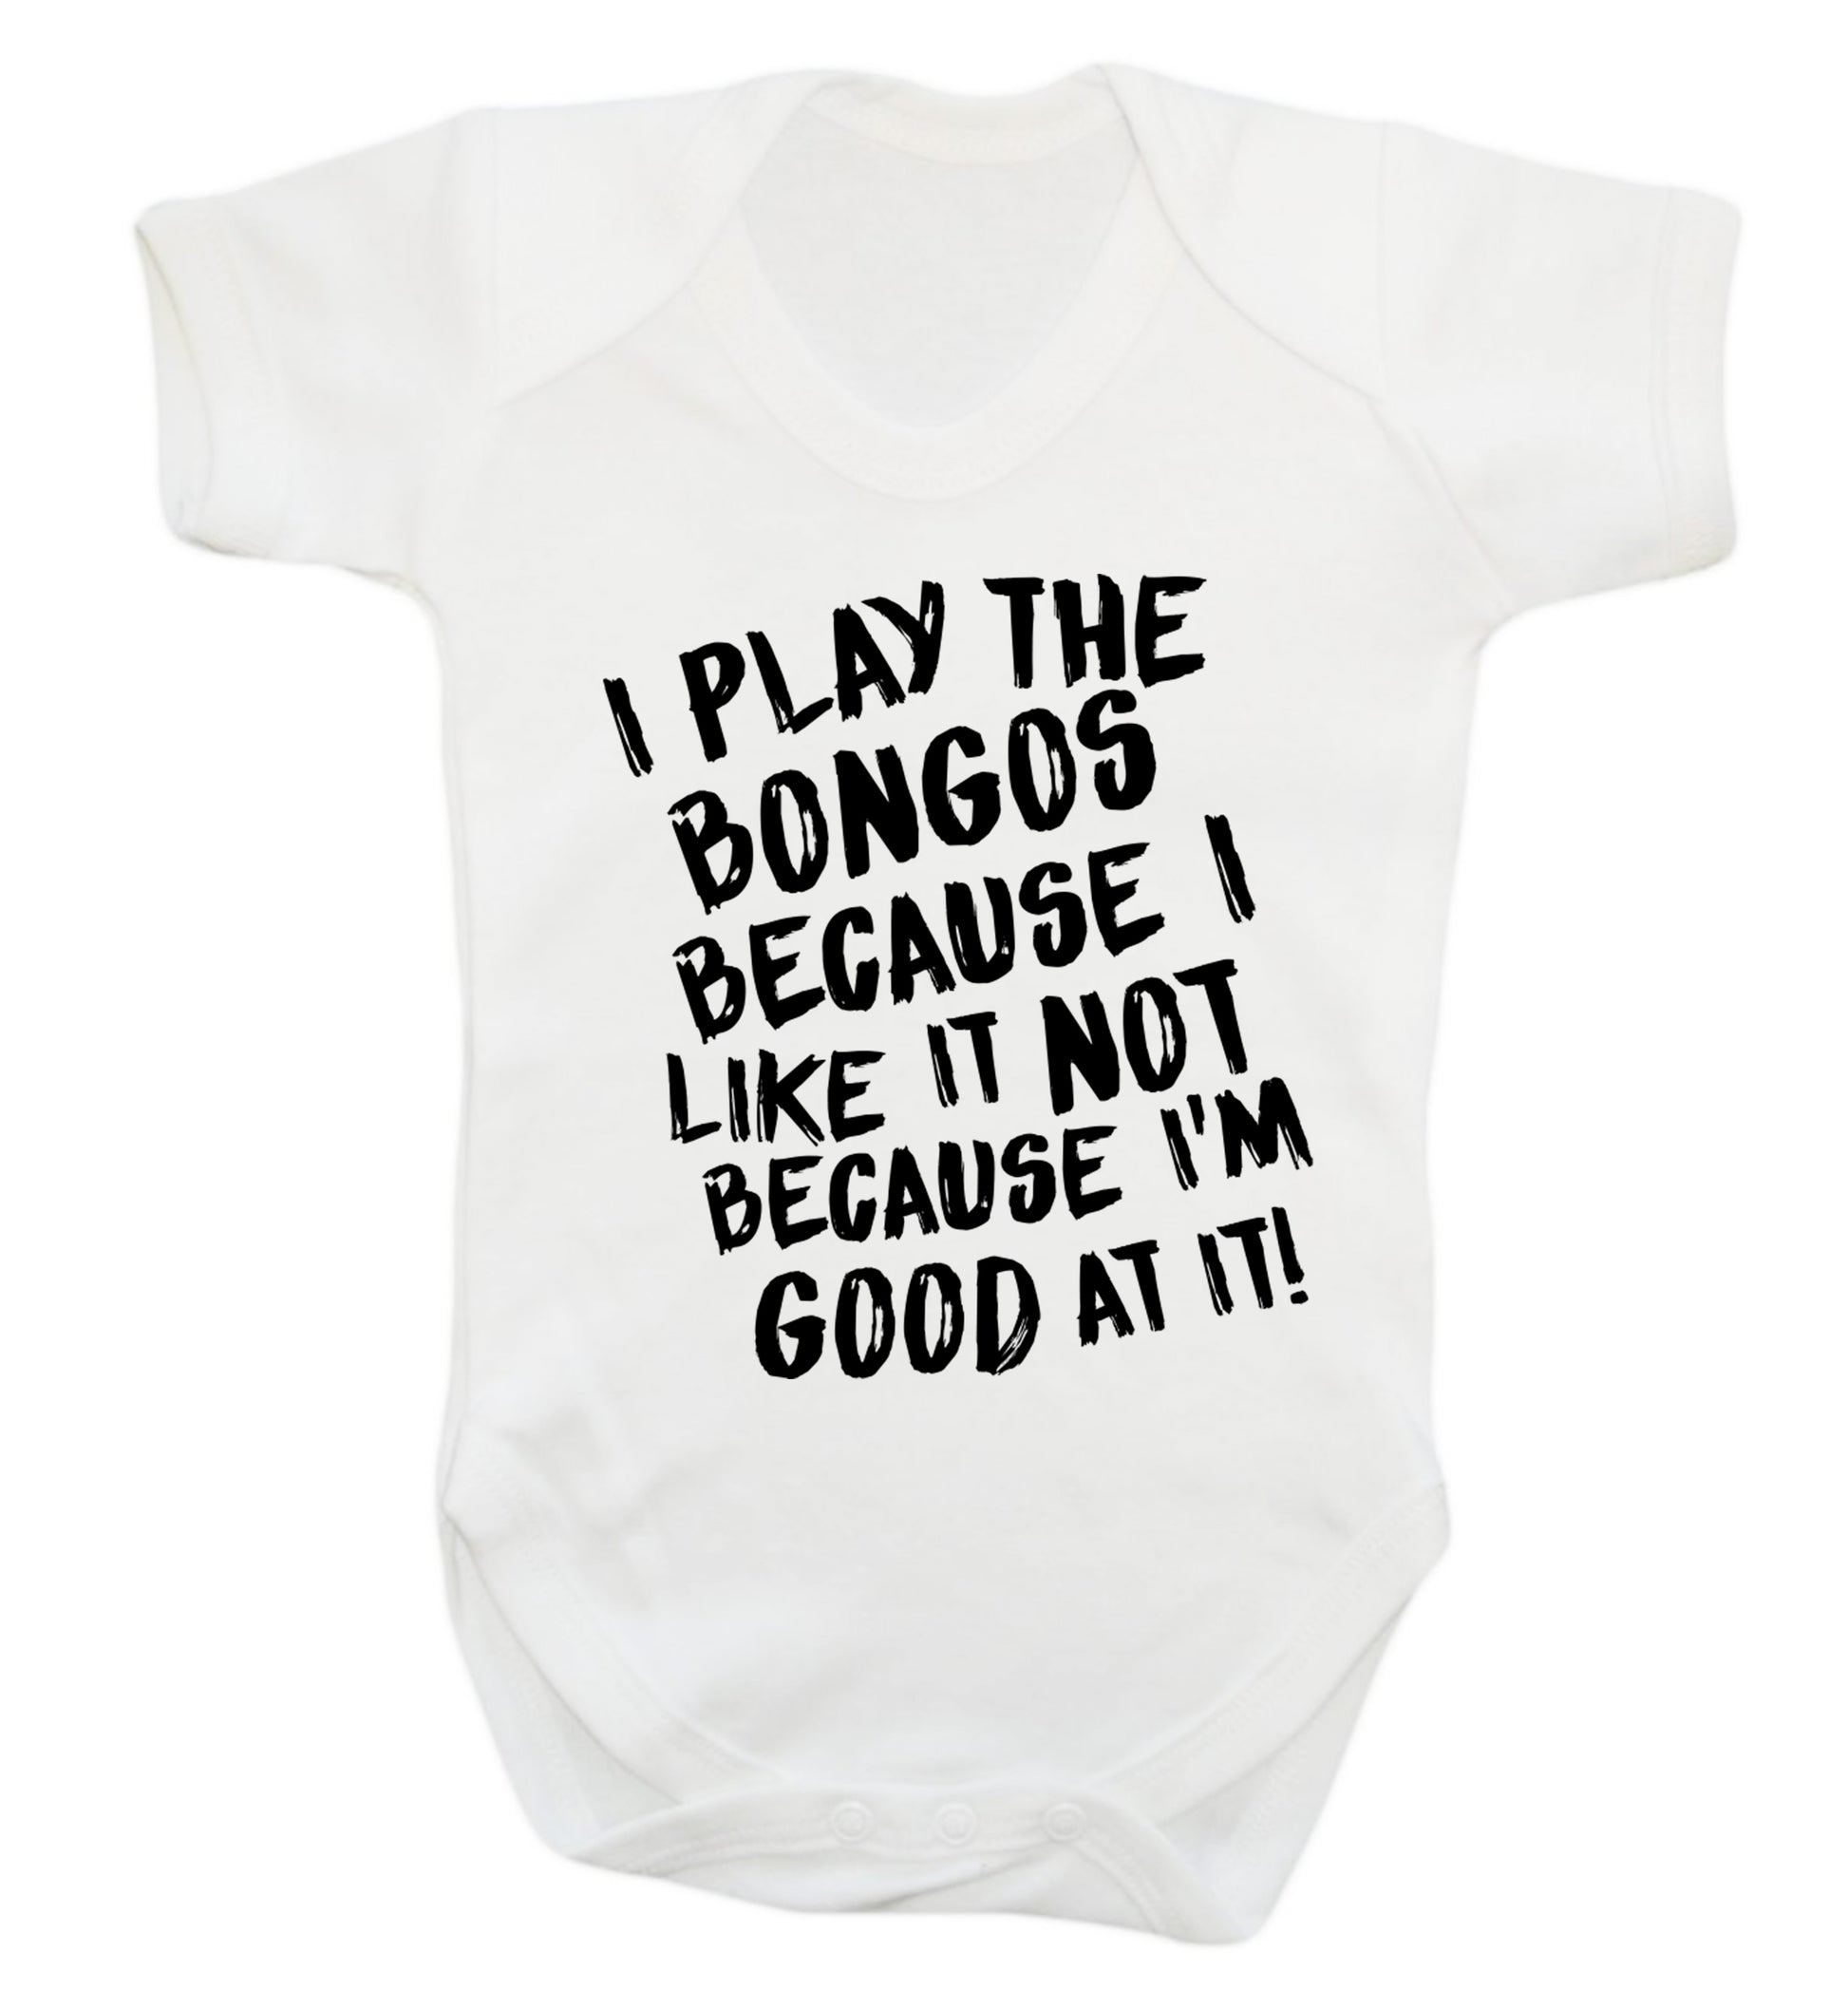 I play the bongos because I like it not because I'm good at it Baby Vest white 18-24 months